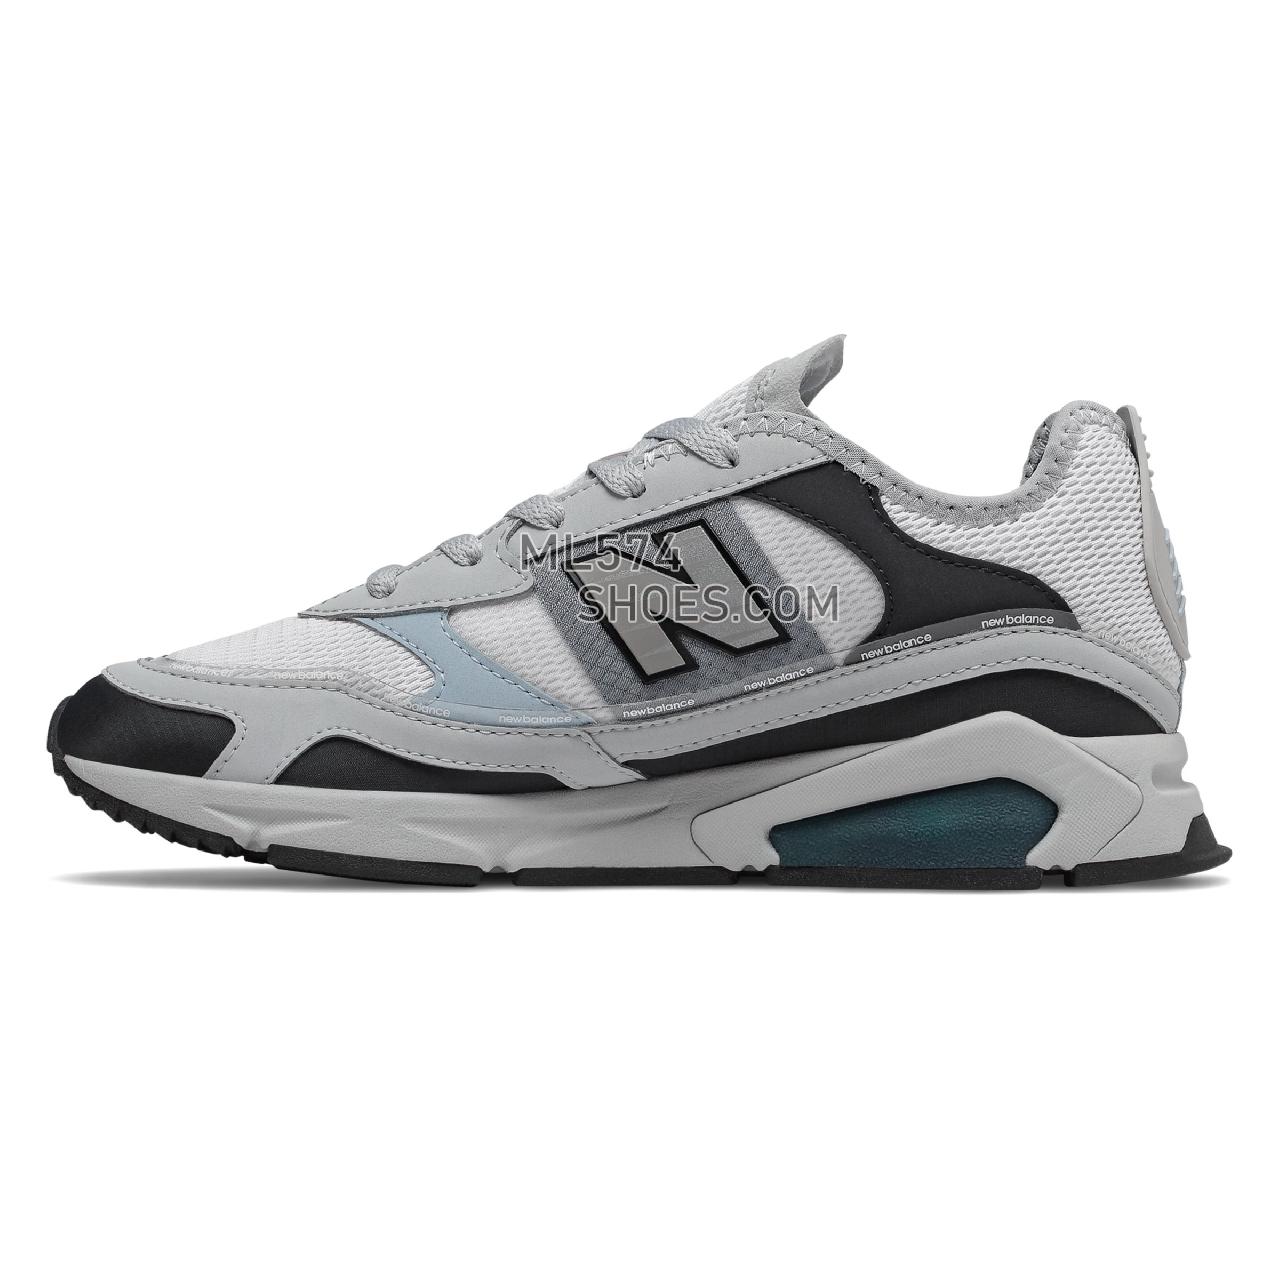 New Balance X-Racer - Women's Sport Style Sneakers - Light Aluminum with Supercell - WSXRCHFB